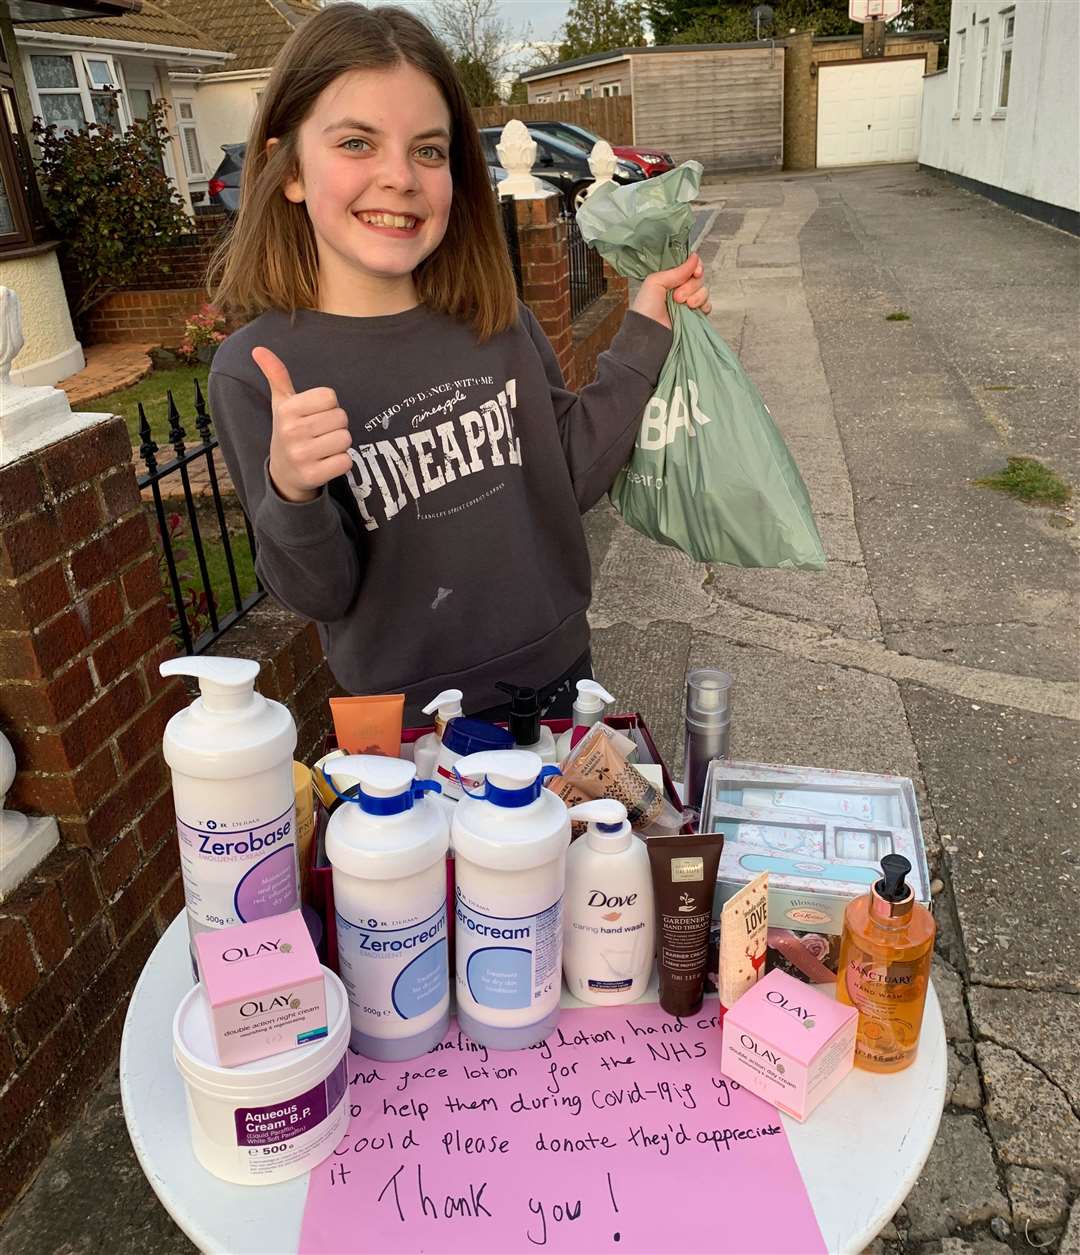 Anya Dixon, outside her house in Joydens Wood, collecting hand and face cream for NHS staff at Darent Valley Hospital